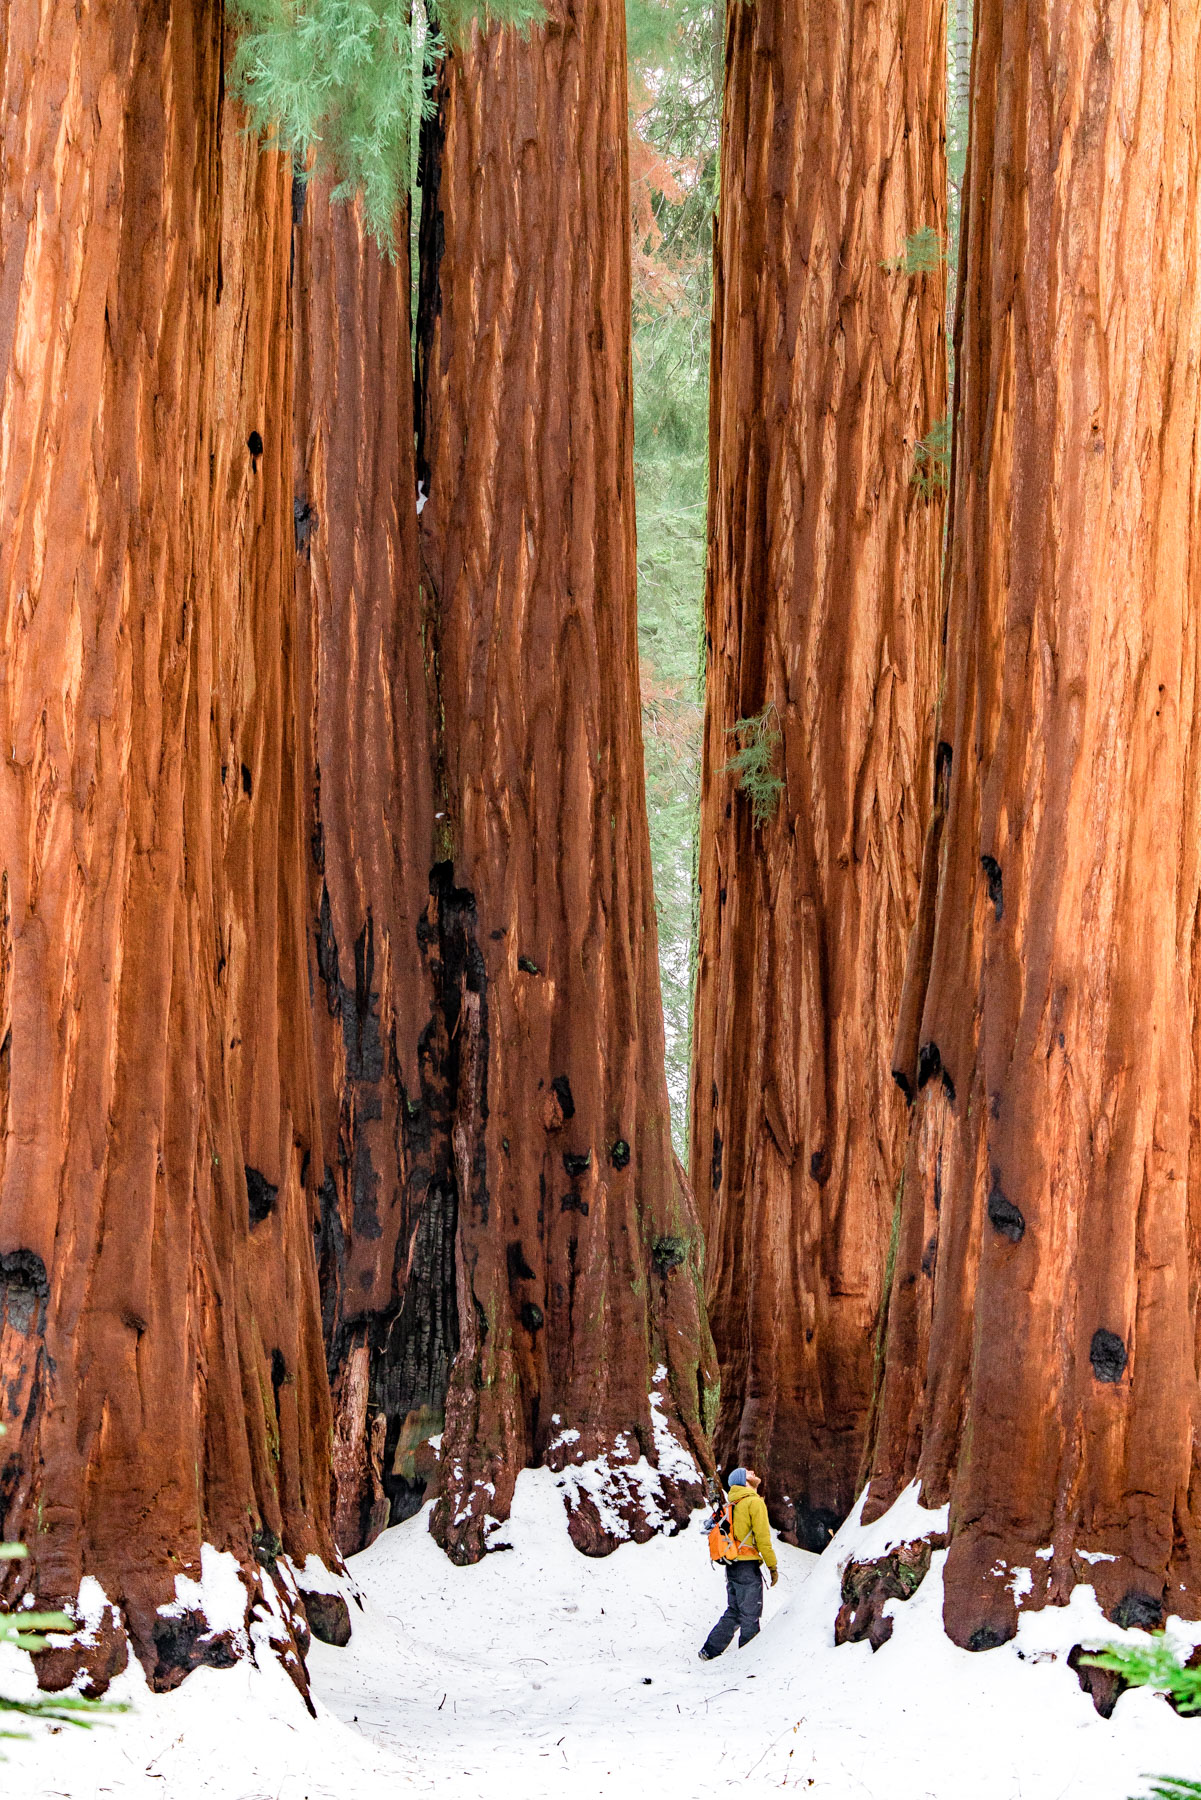 Sequoia & Kings Canyon National Park Facts include Sequoia trees which are among the largest in the world.